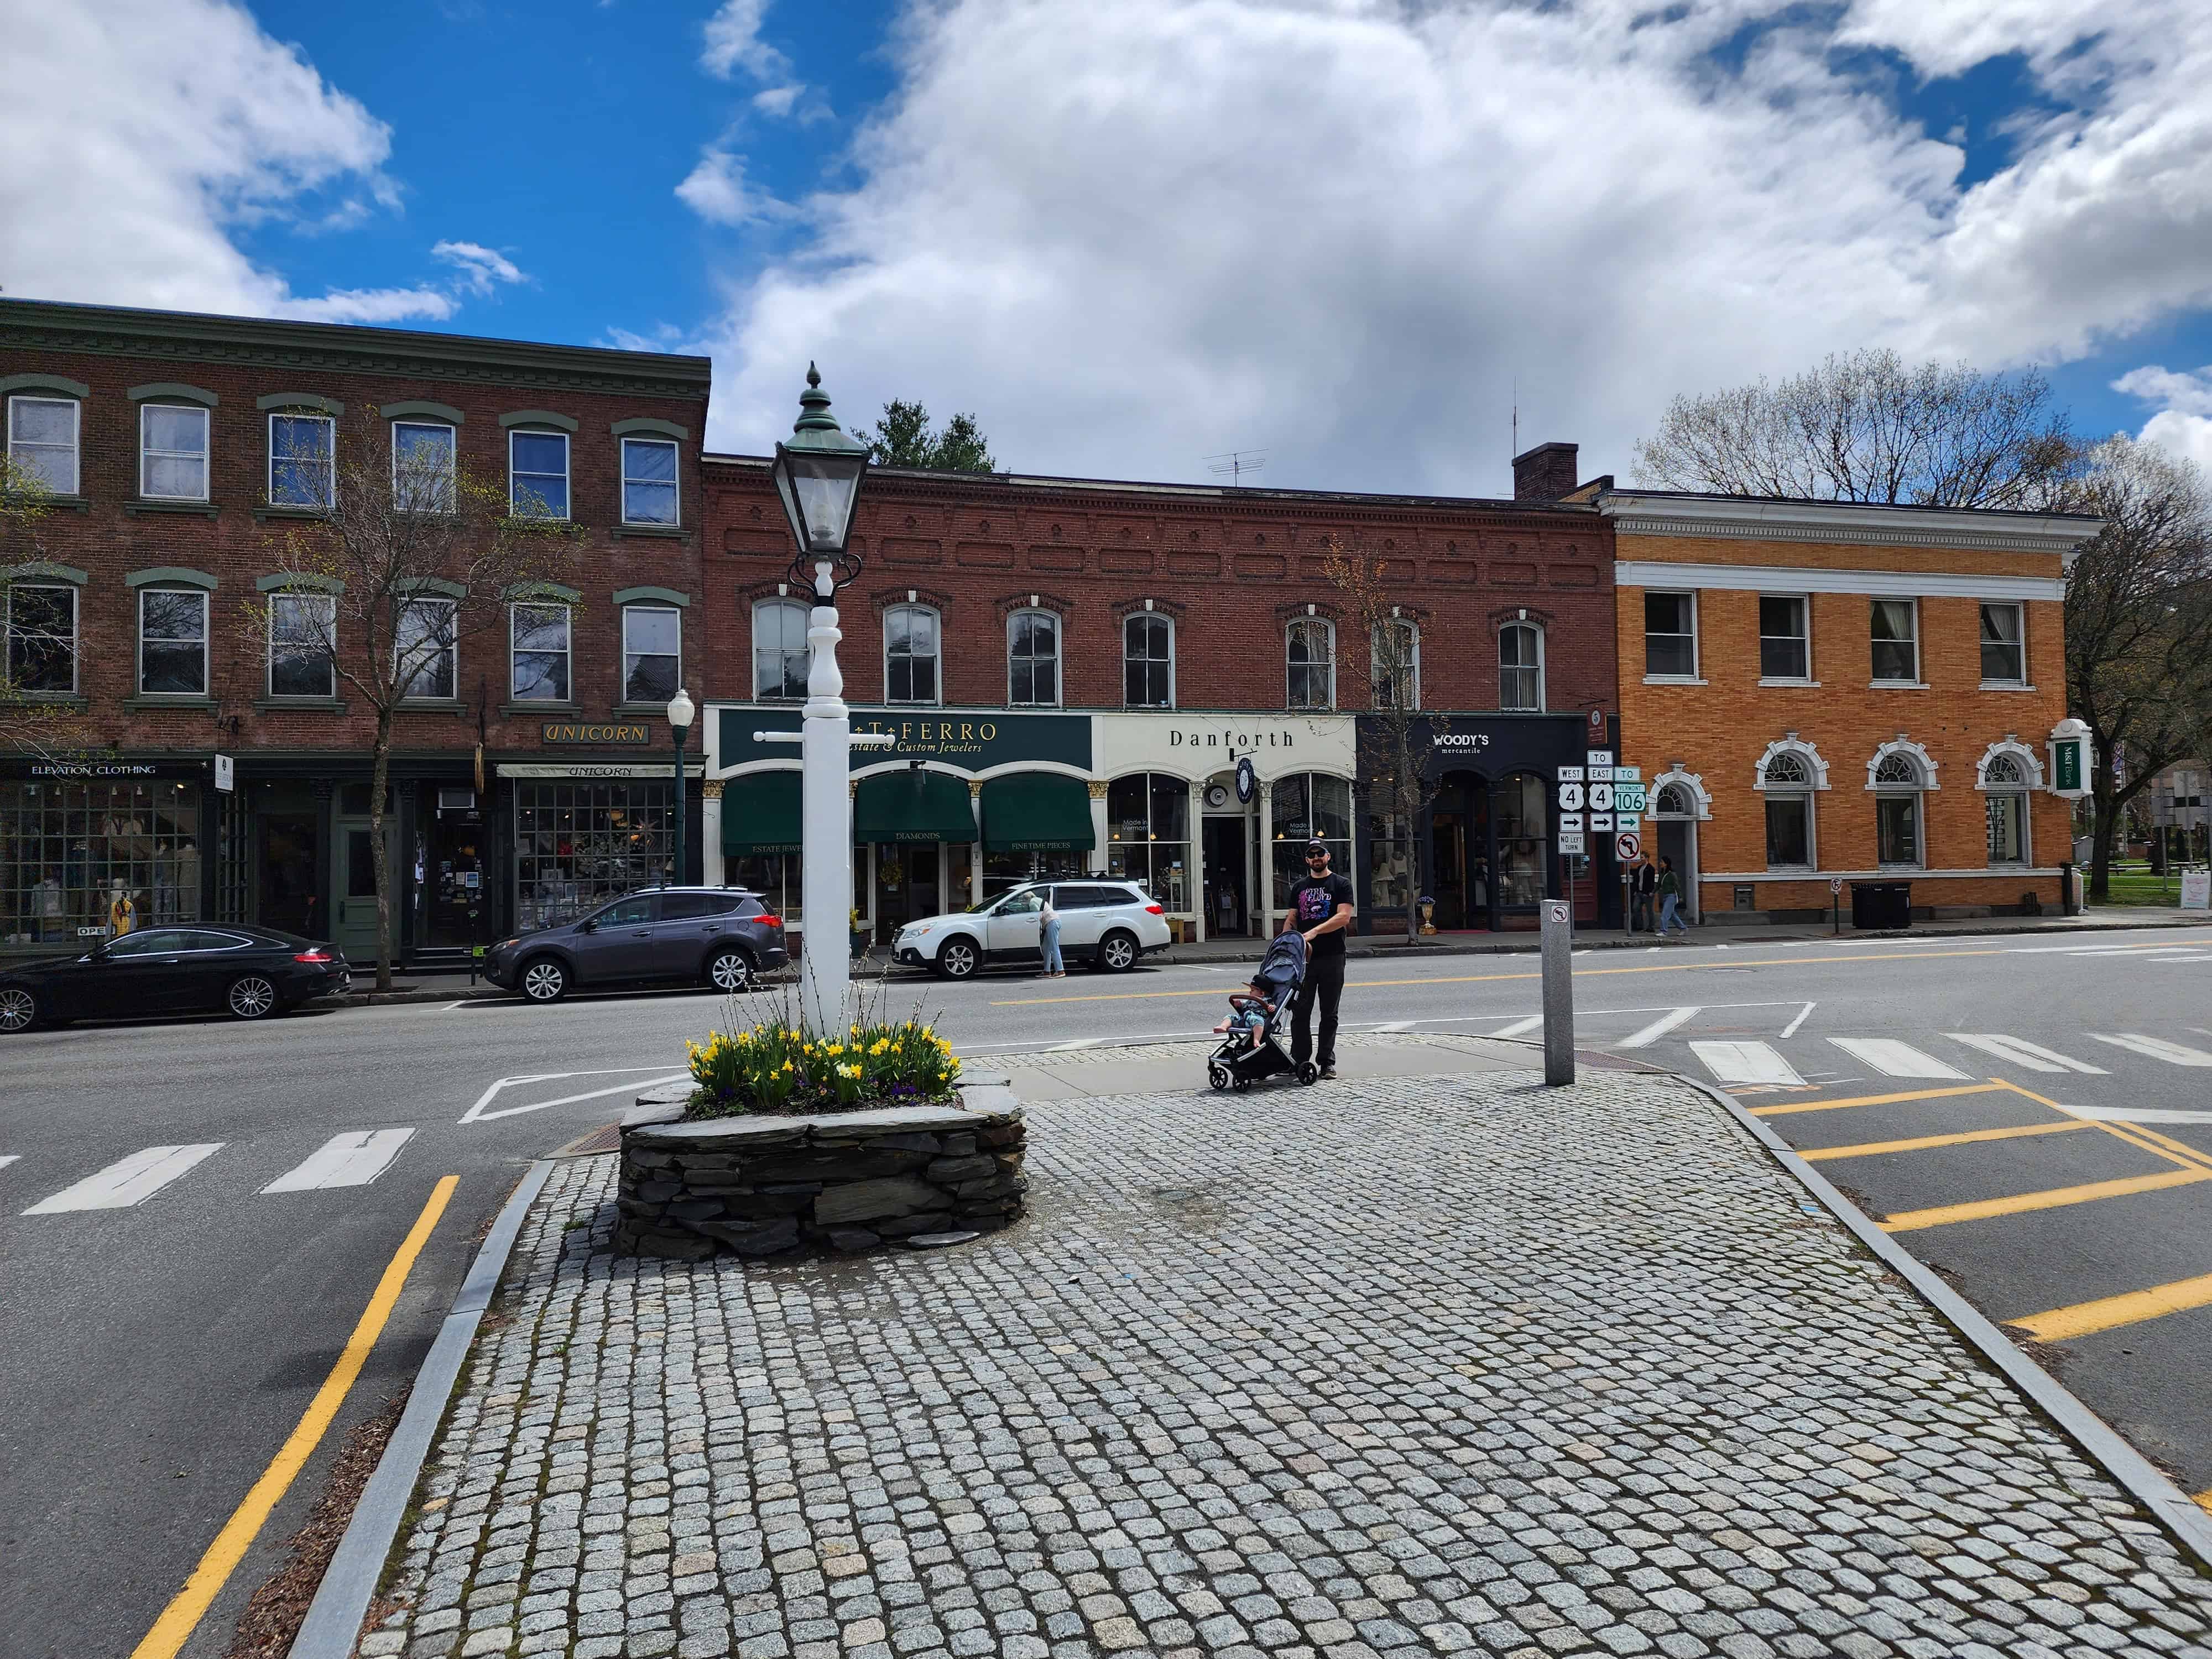 Woodstock Vermont town square with brick shops in the distance, a man pushing a stroller looks at the camera